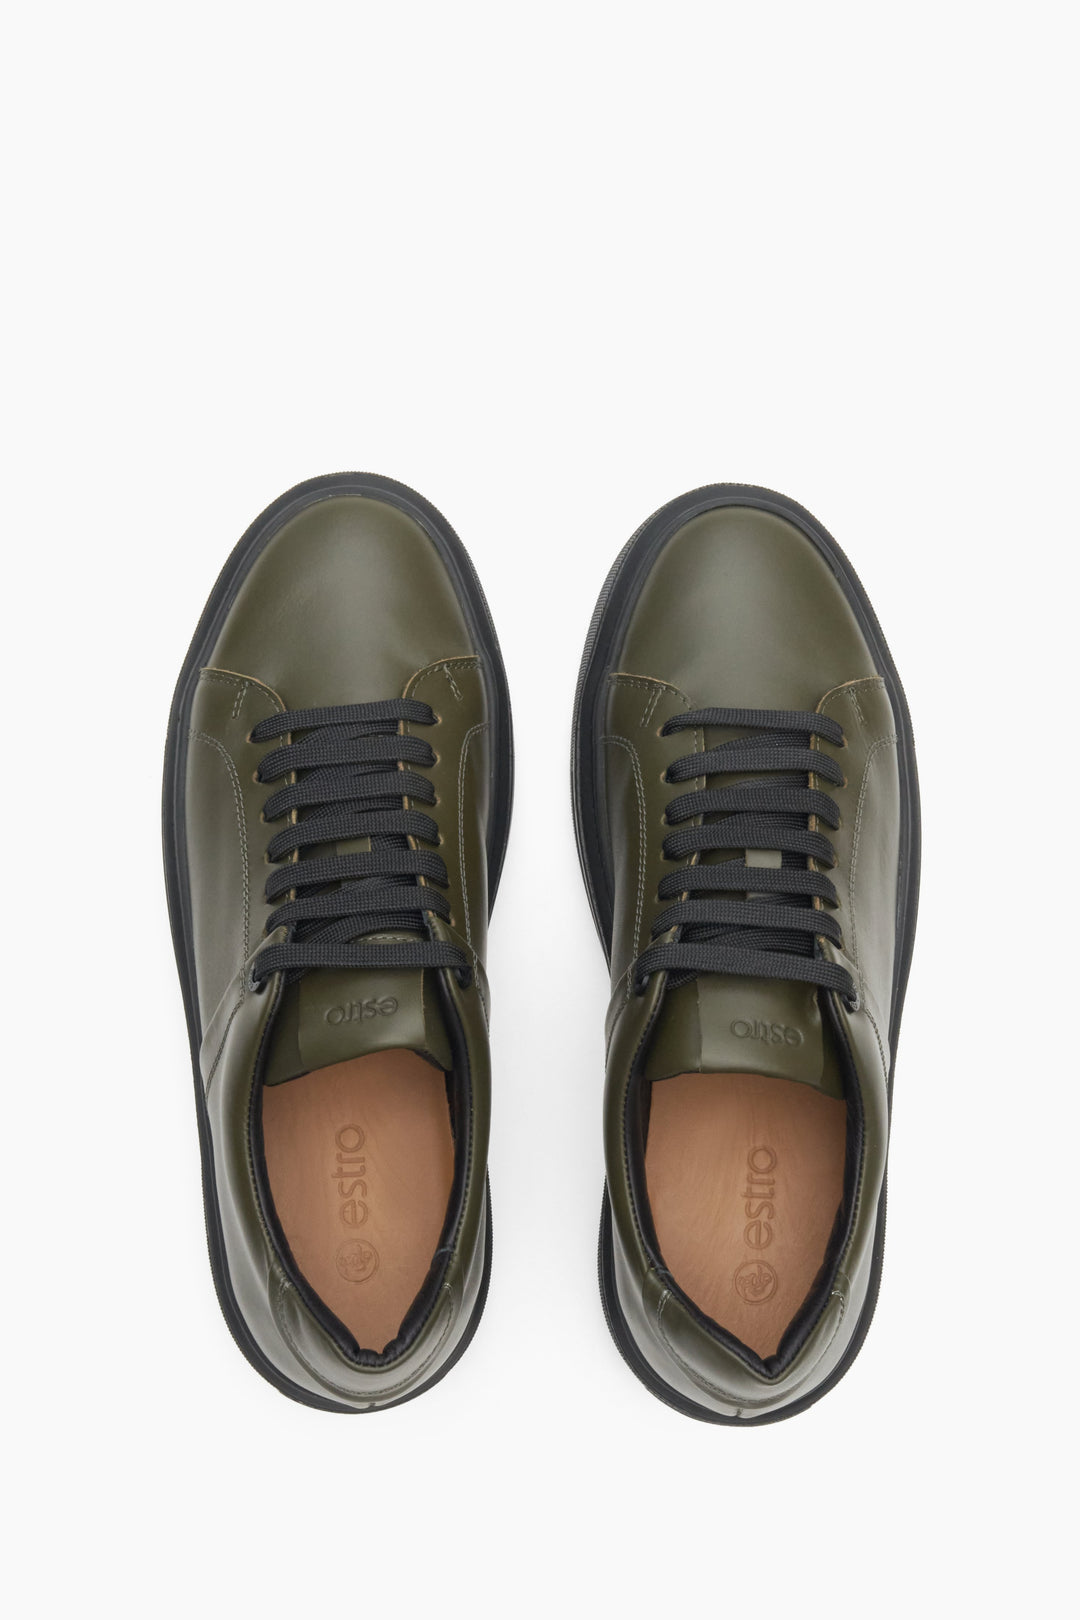 Men's khaki Estro sneakers in genuine leather with laces - top view presentation of the model.